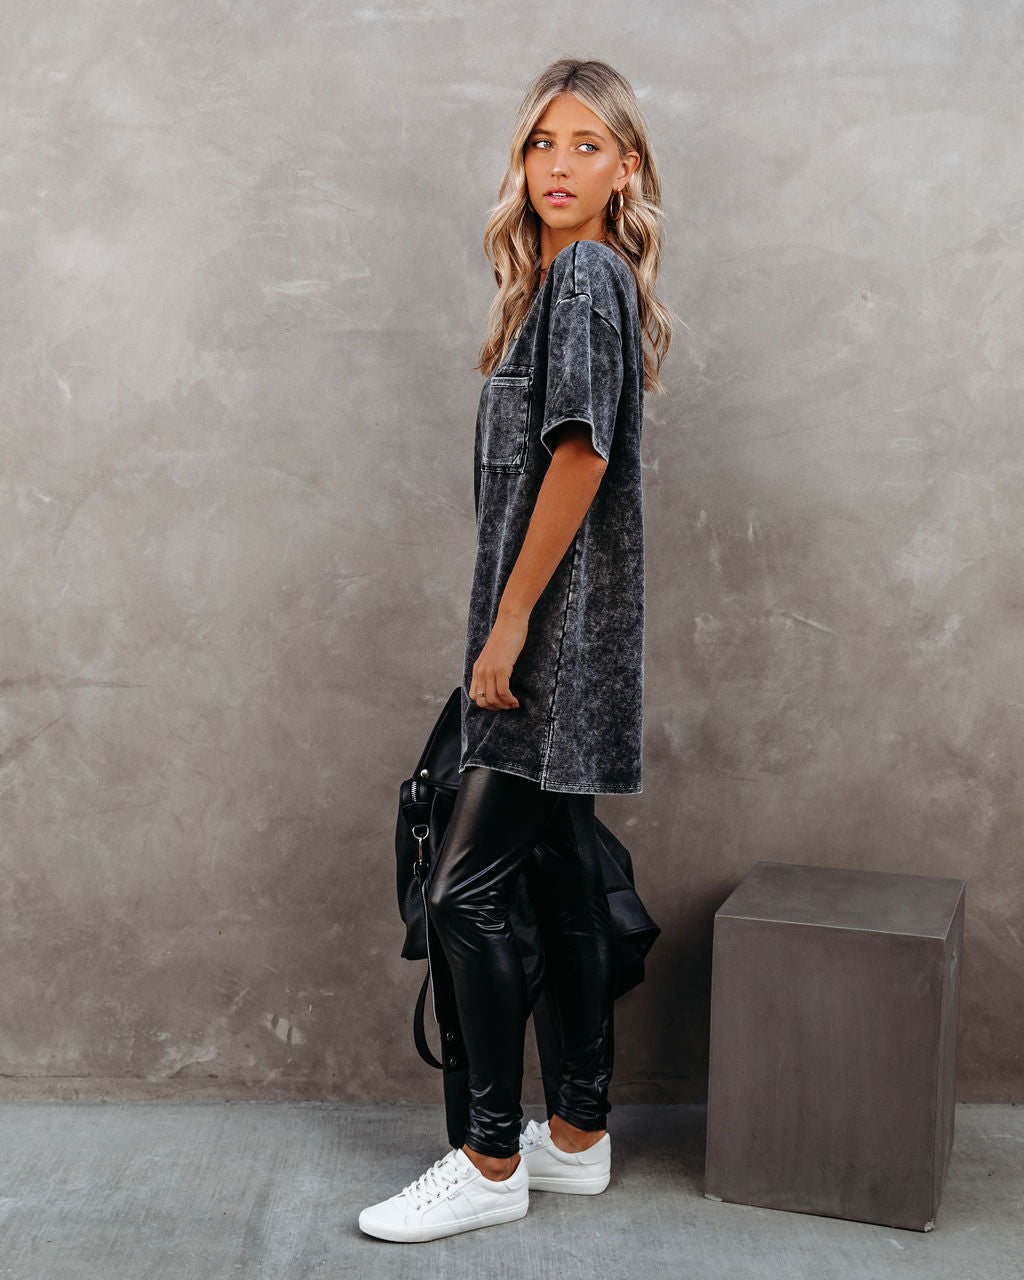 Ttyl Cotton Mineral Wash Oversized Tee - Charcoal